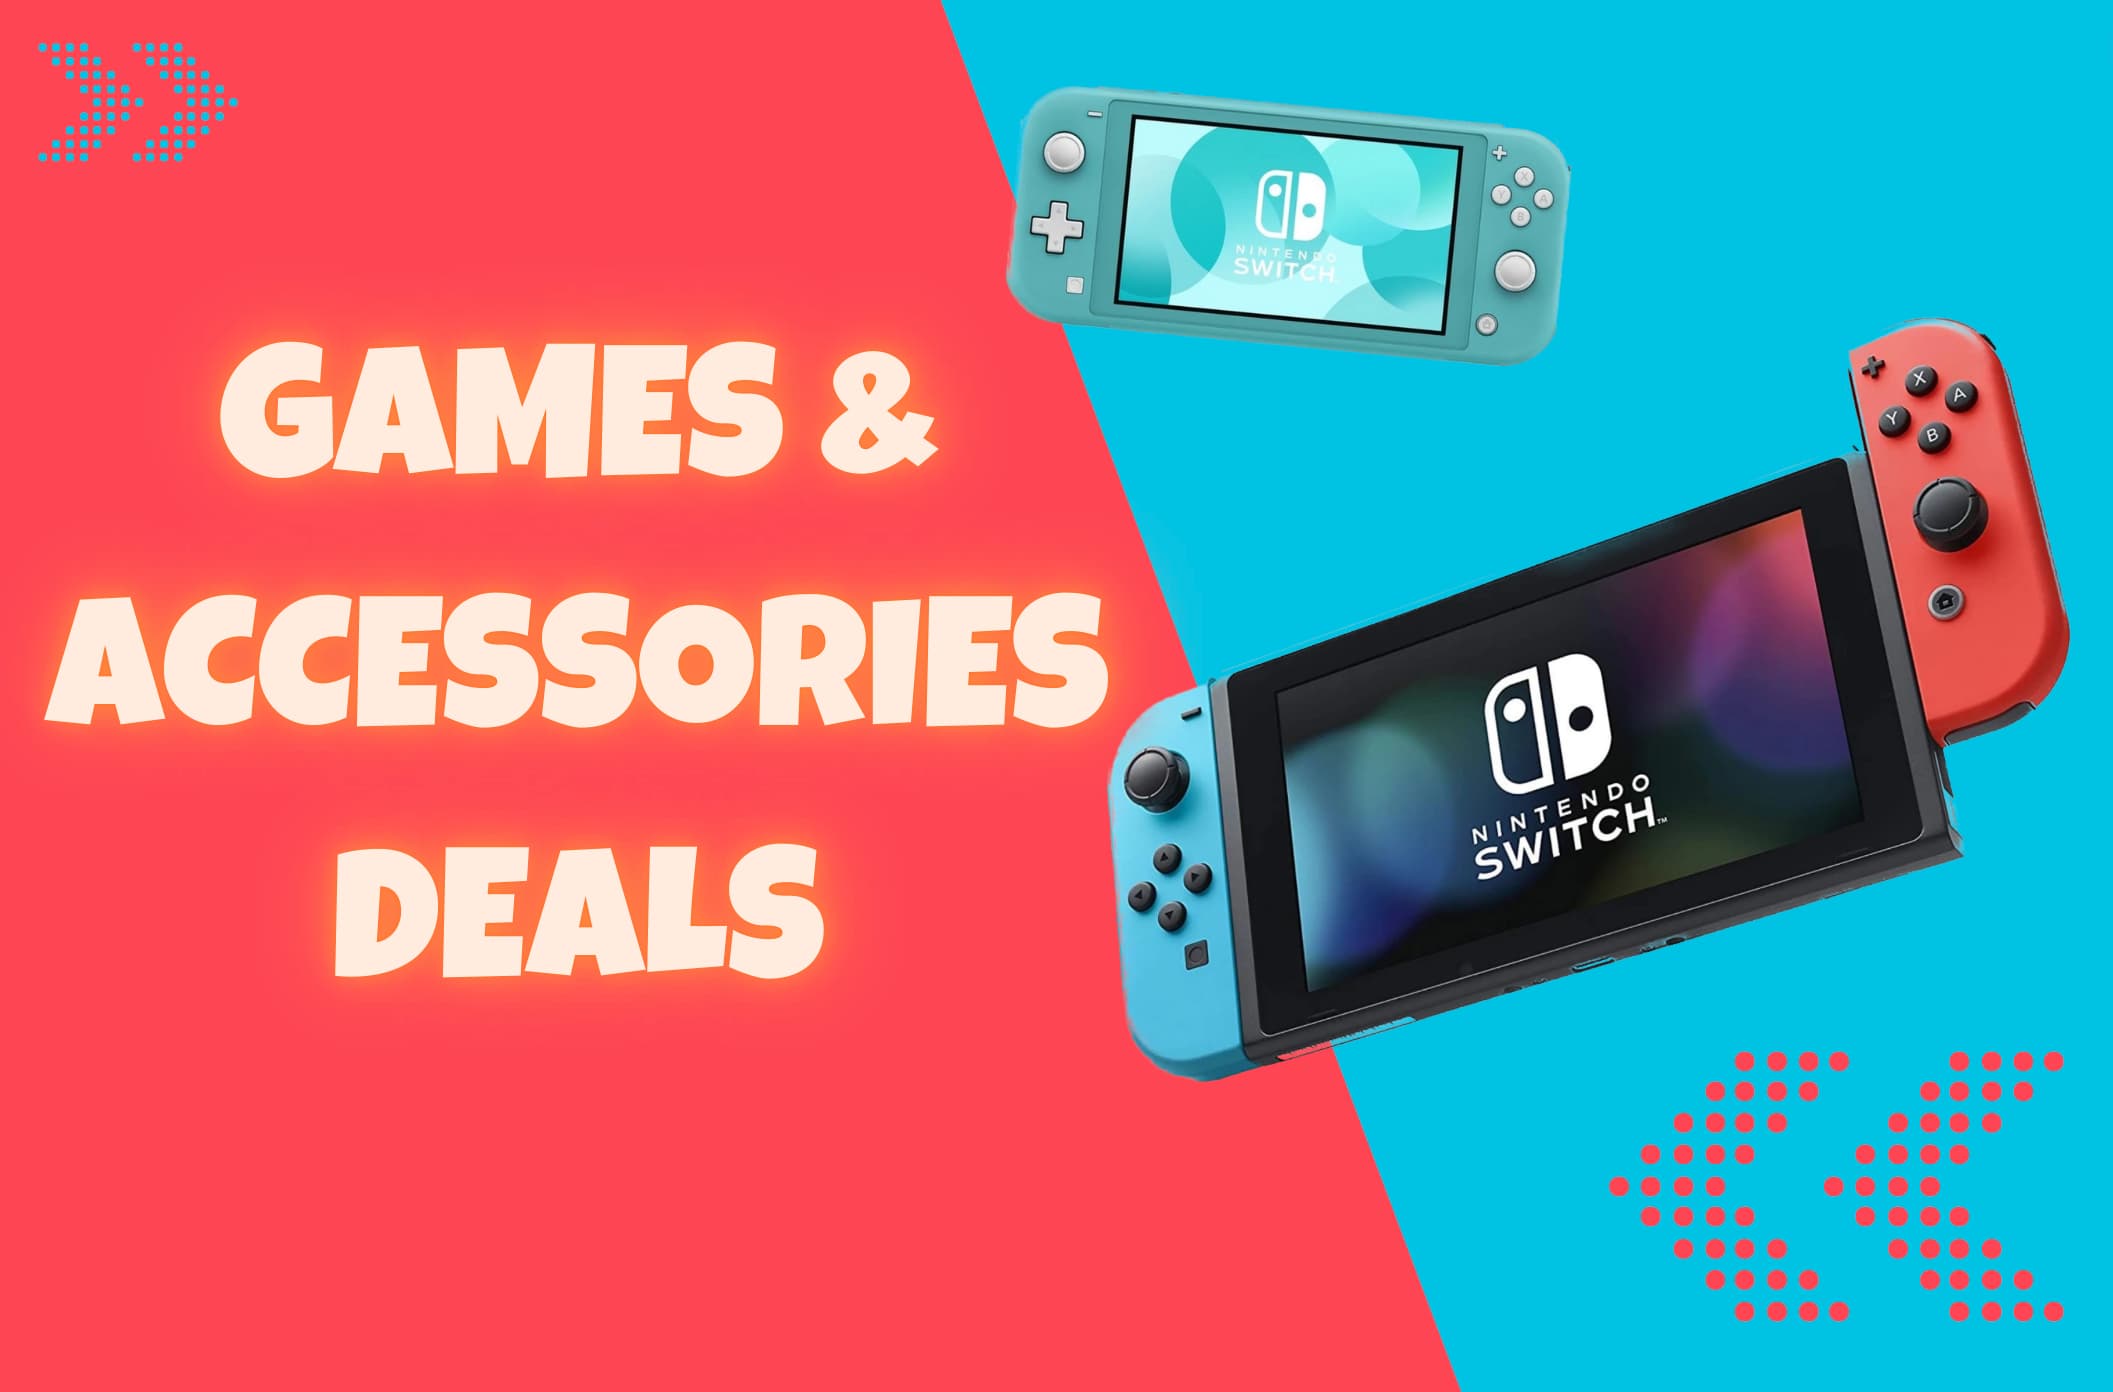 Games & Accessories Deals for Nintendo Switch